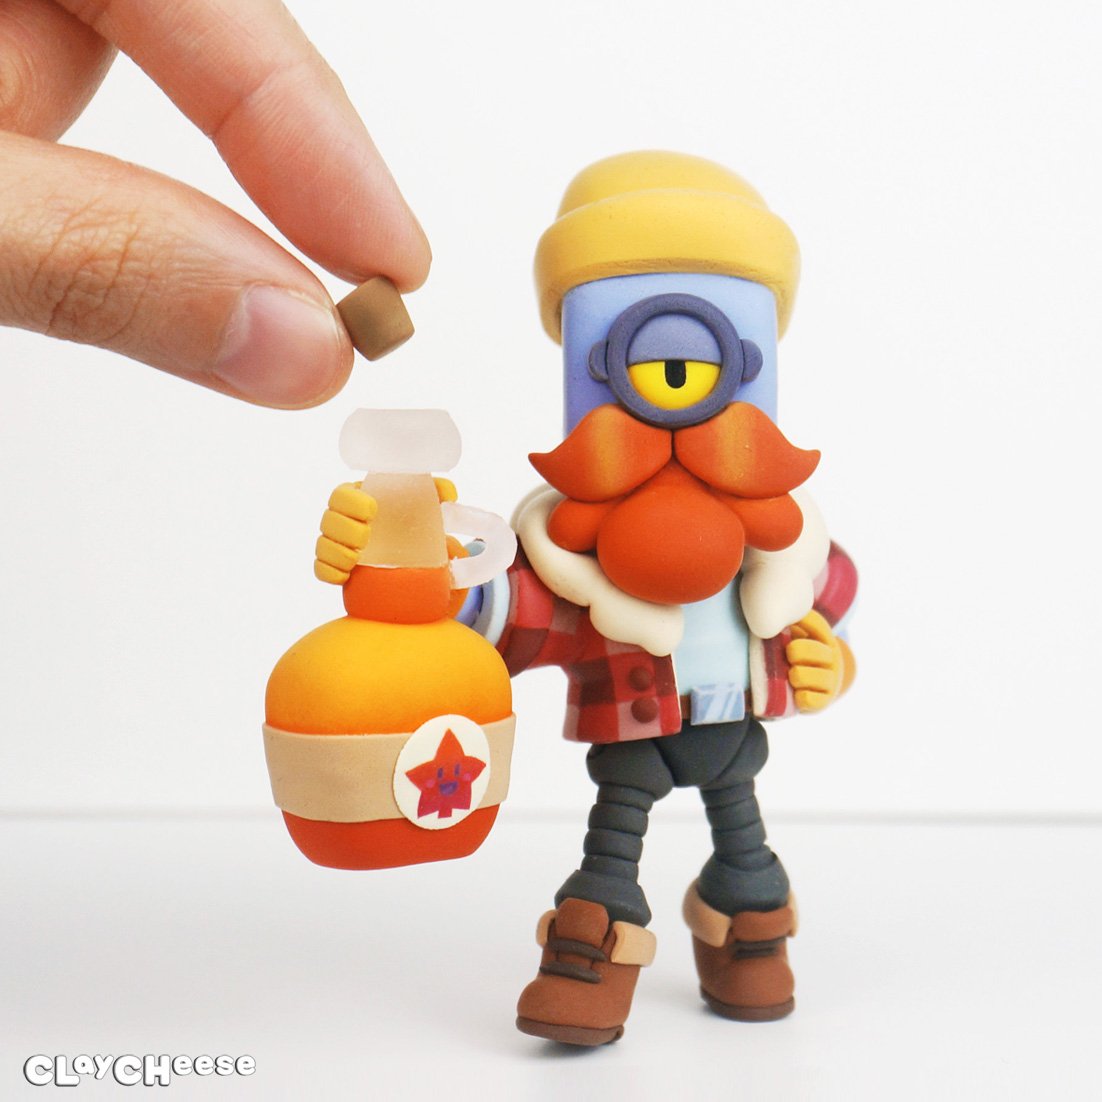 Hello. It’s CLayCHeese.
I made Brawl Stars MAPLE BARLEY with air dry clay. 🍁
If you want, you can see the making video.👉youtu.be/Vleehwq7gH4
THANK YOU!
#brawlstarsbarley #brawlstars #clayart #maplebarley
#브롤스타즈 #ブロスタ #荒野亂鬥 #БРАВЛСТАРС